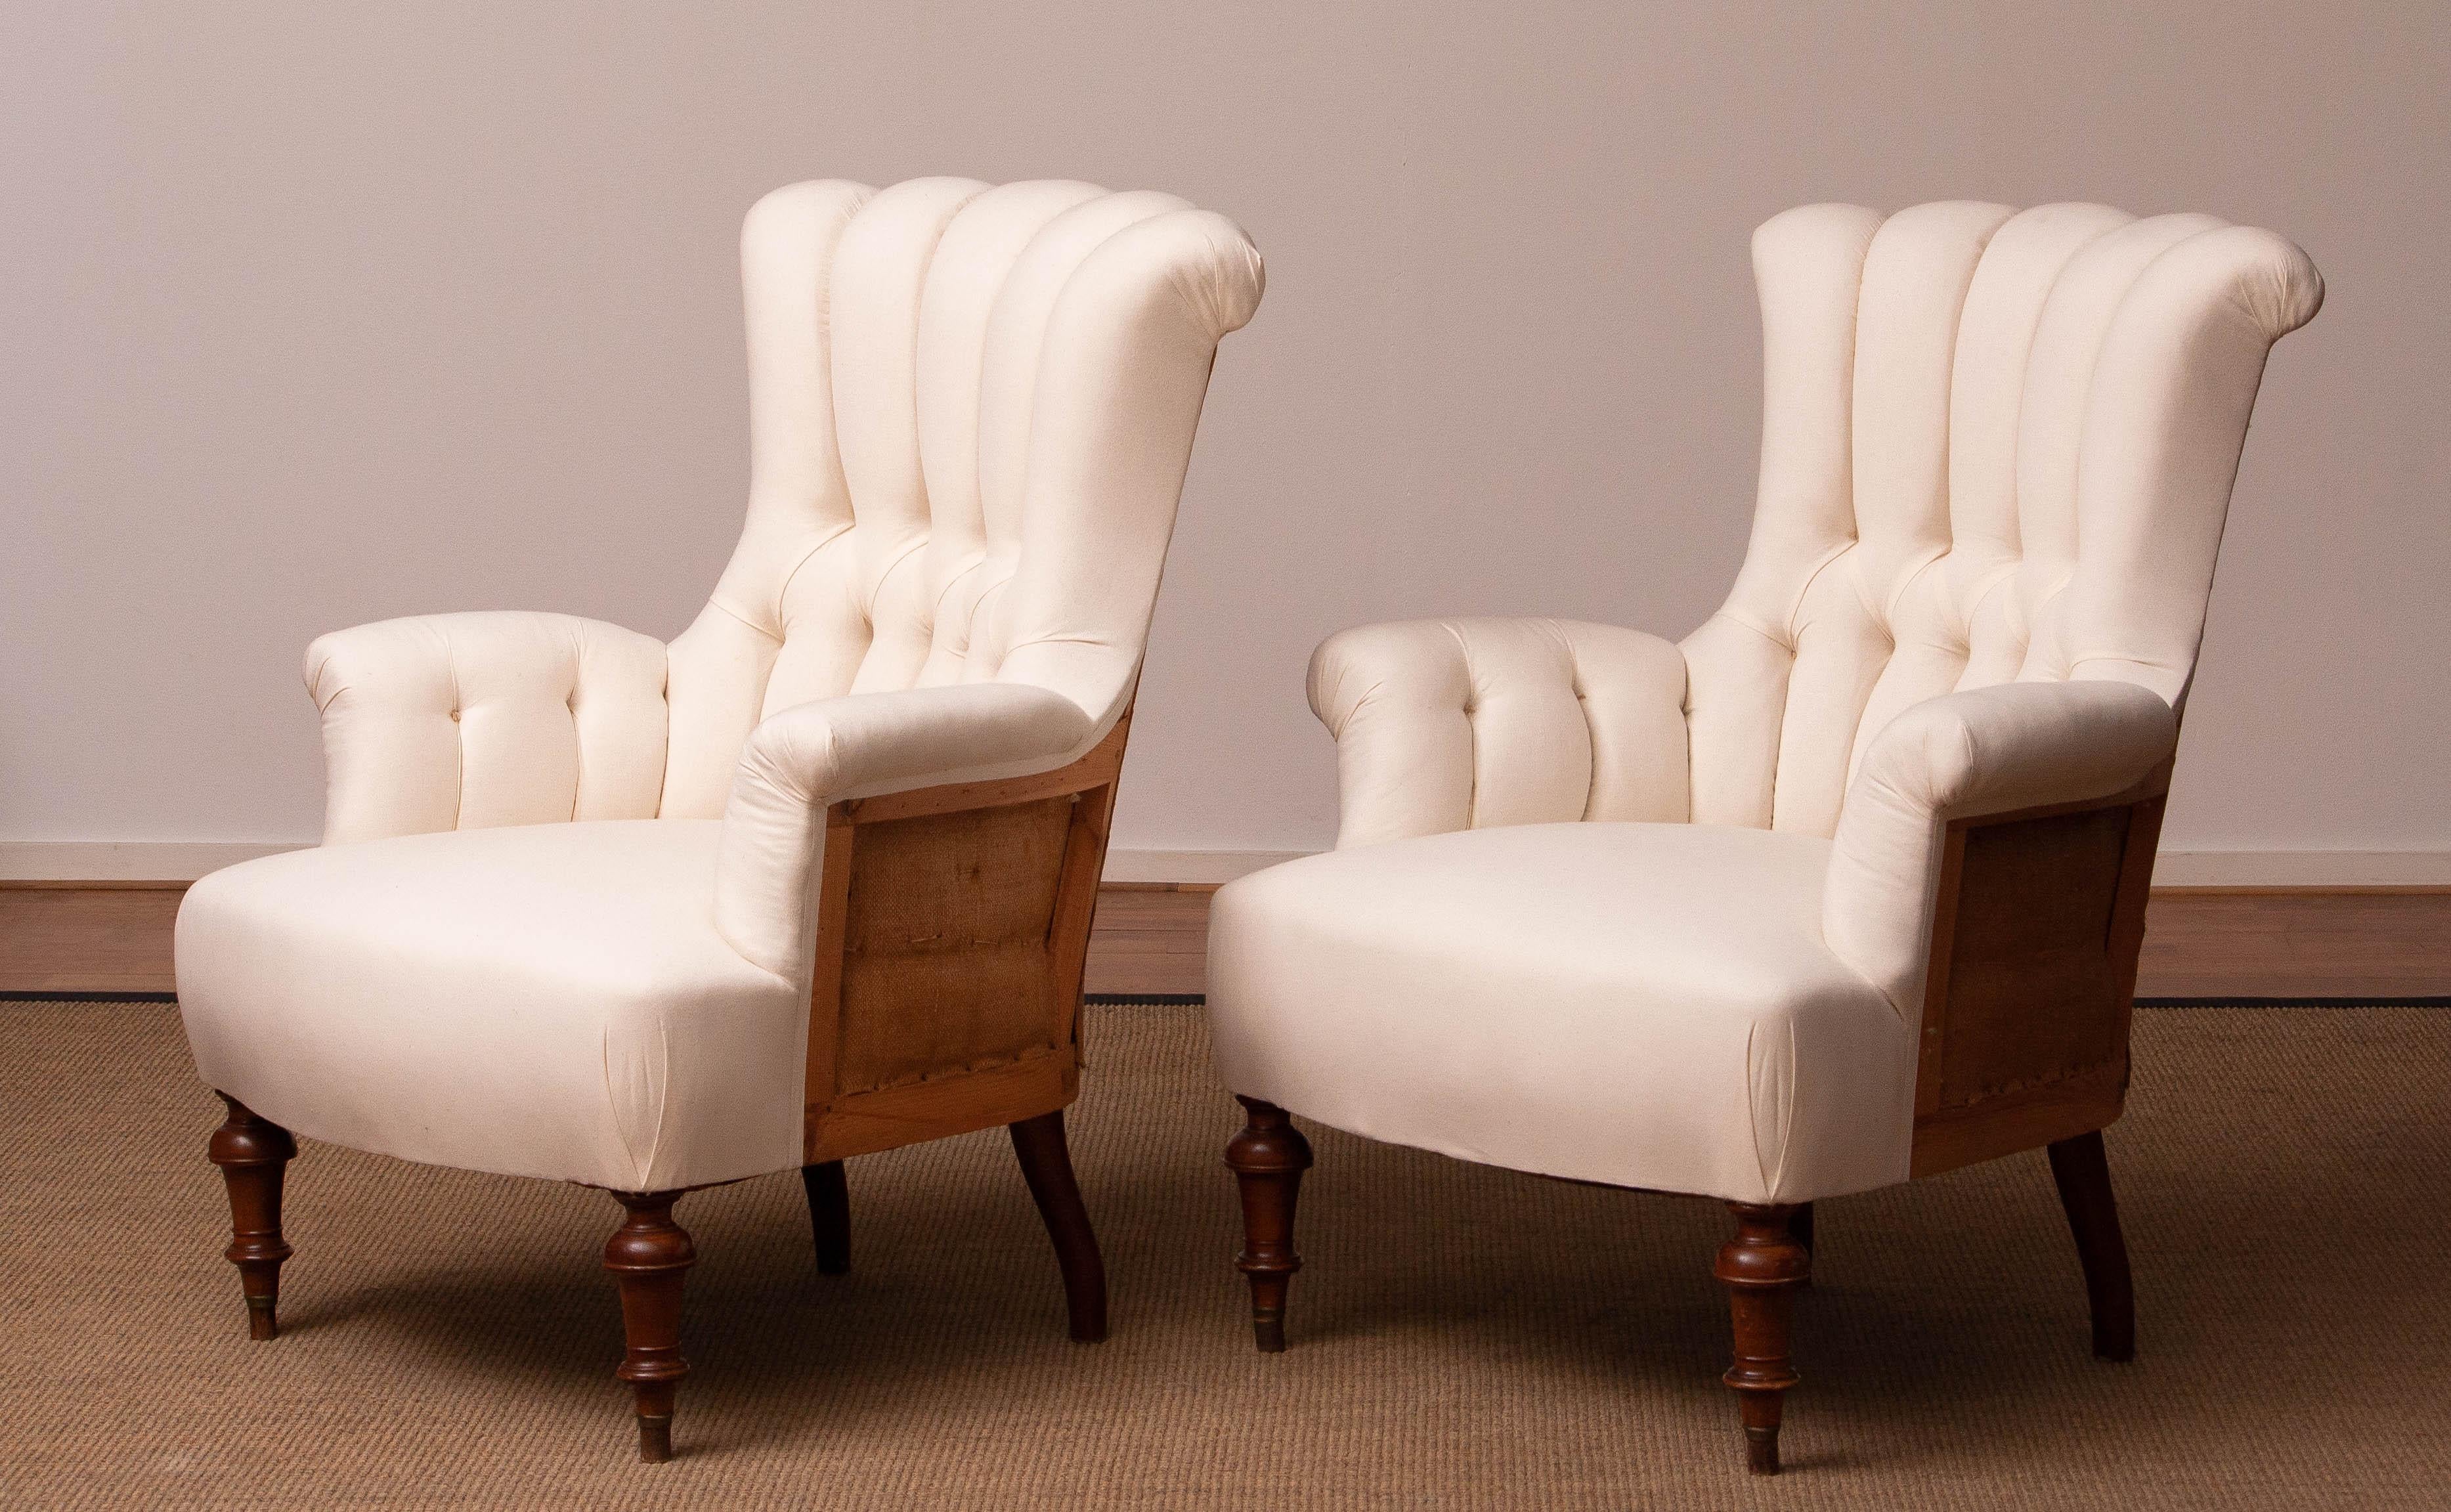 Pair Domestic Cotton Victorian 'Deconstructed' Tufted Scroll-back Chair, 1900 For Sale 3